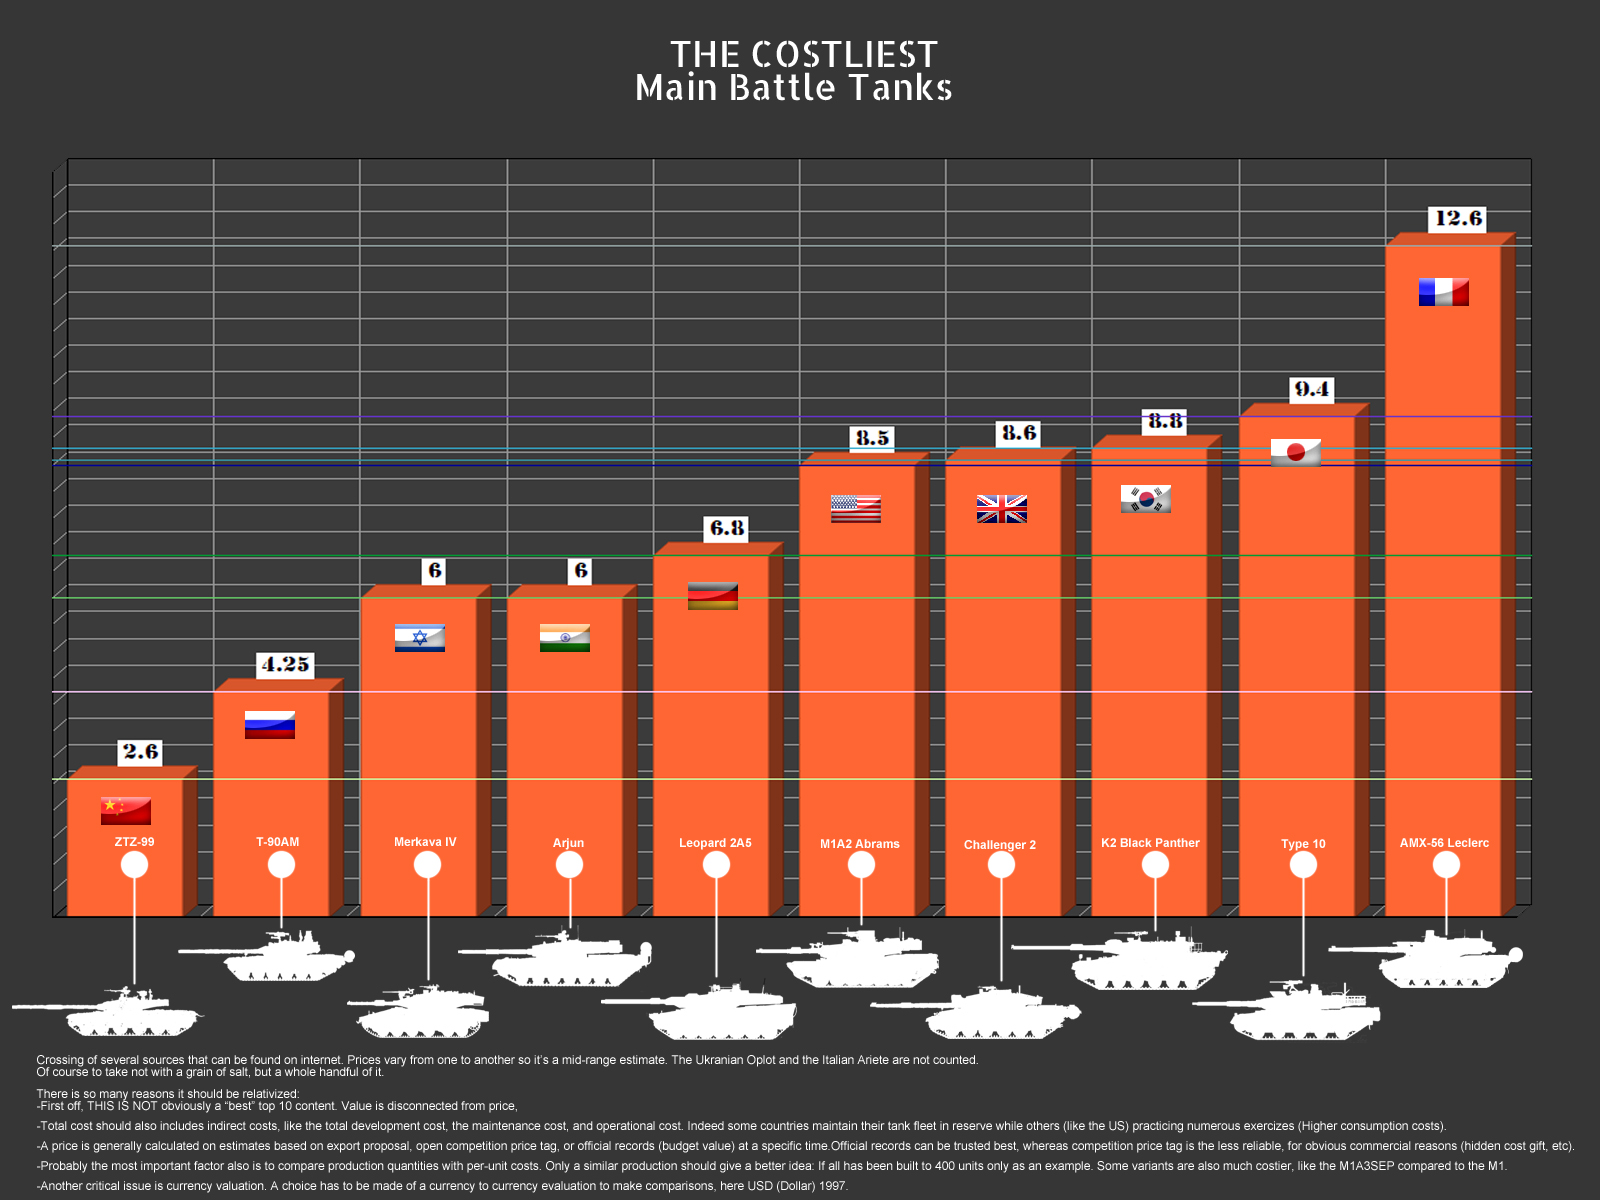 The cost includes. How much does a Tank cost. Сравнение профилей ОБТ разных стран. Main cost. How much does a Military Tank cost.